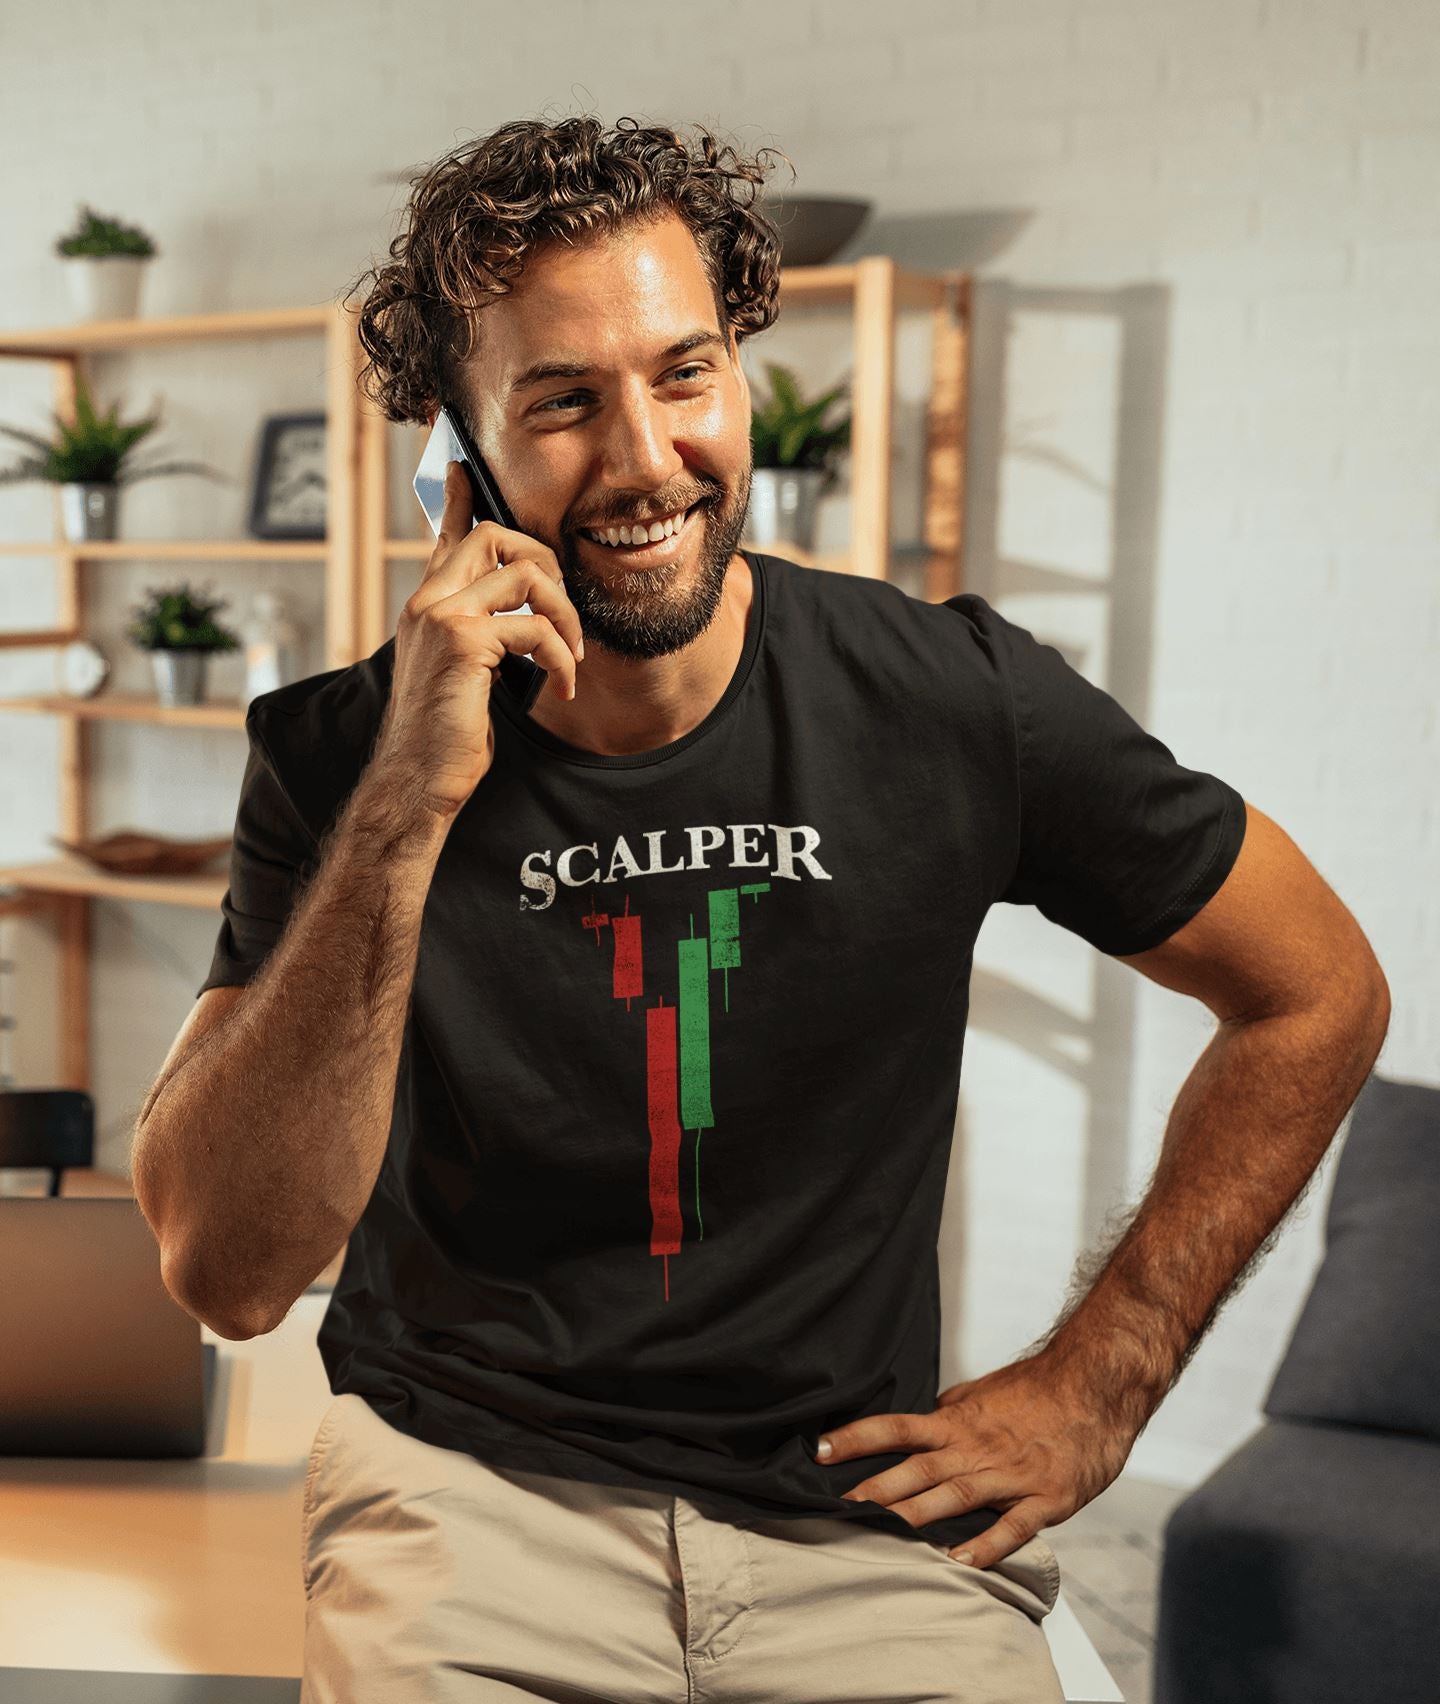 Scalper Exclusive Black Shirt for Trader Men and Women - Catch My Drift India